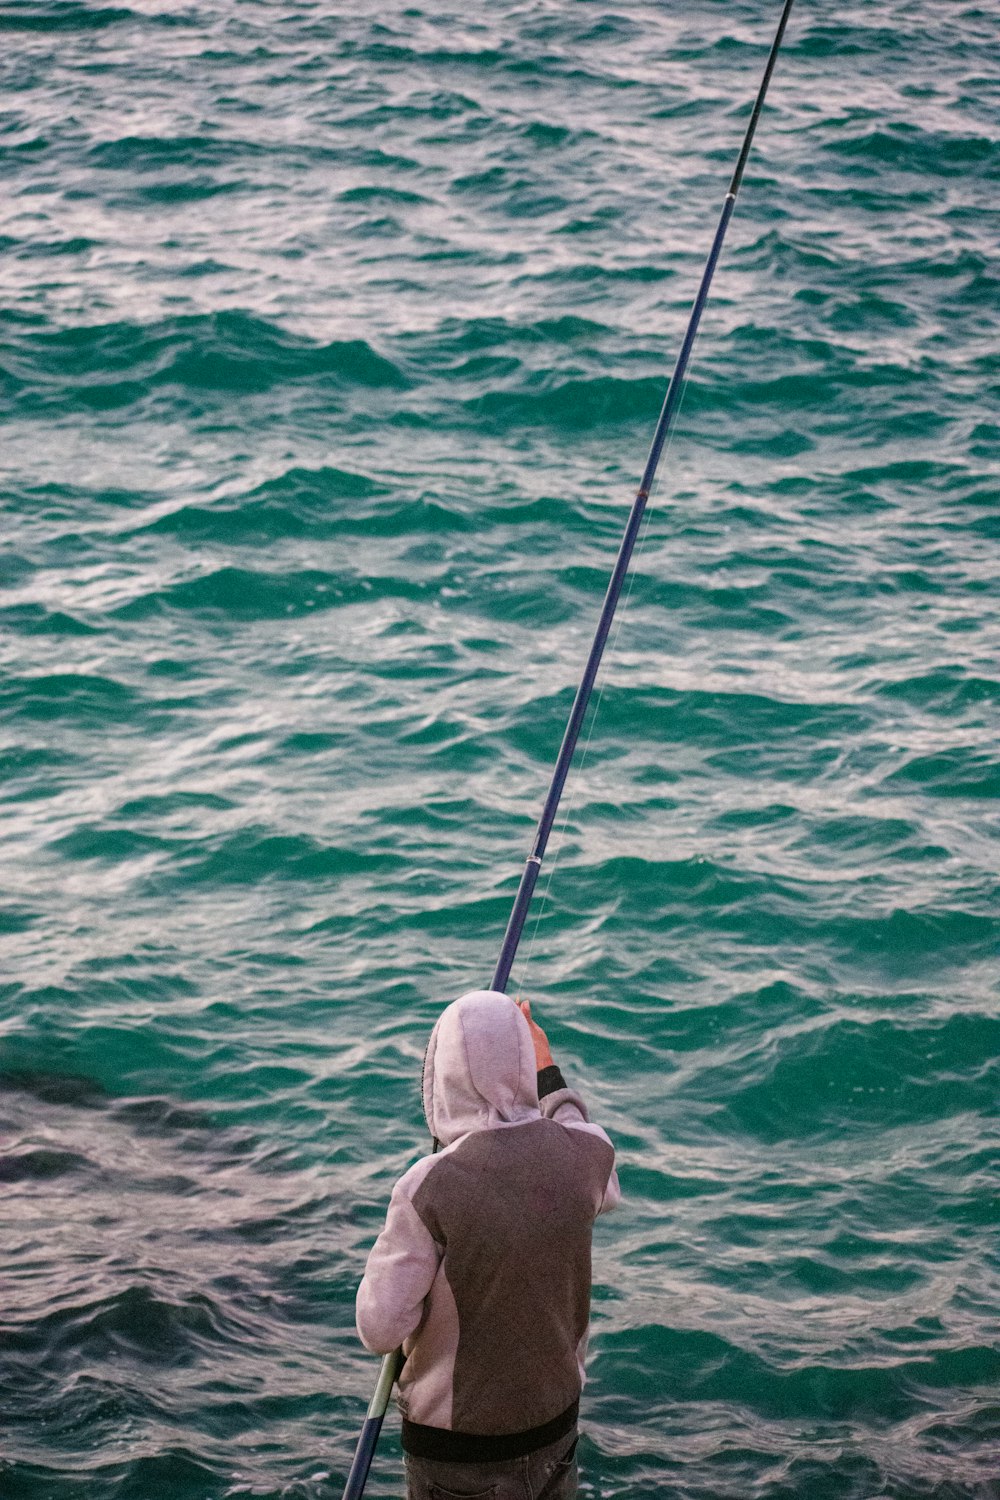 a person is fishing in the water with a pole